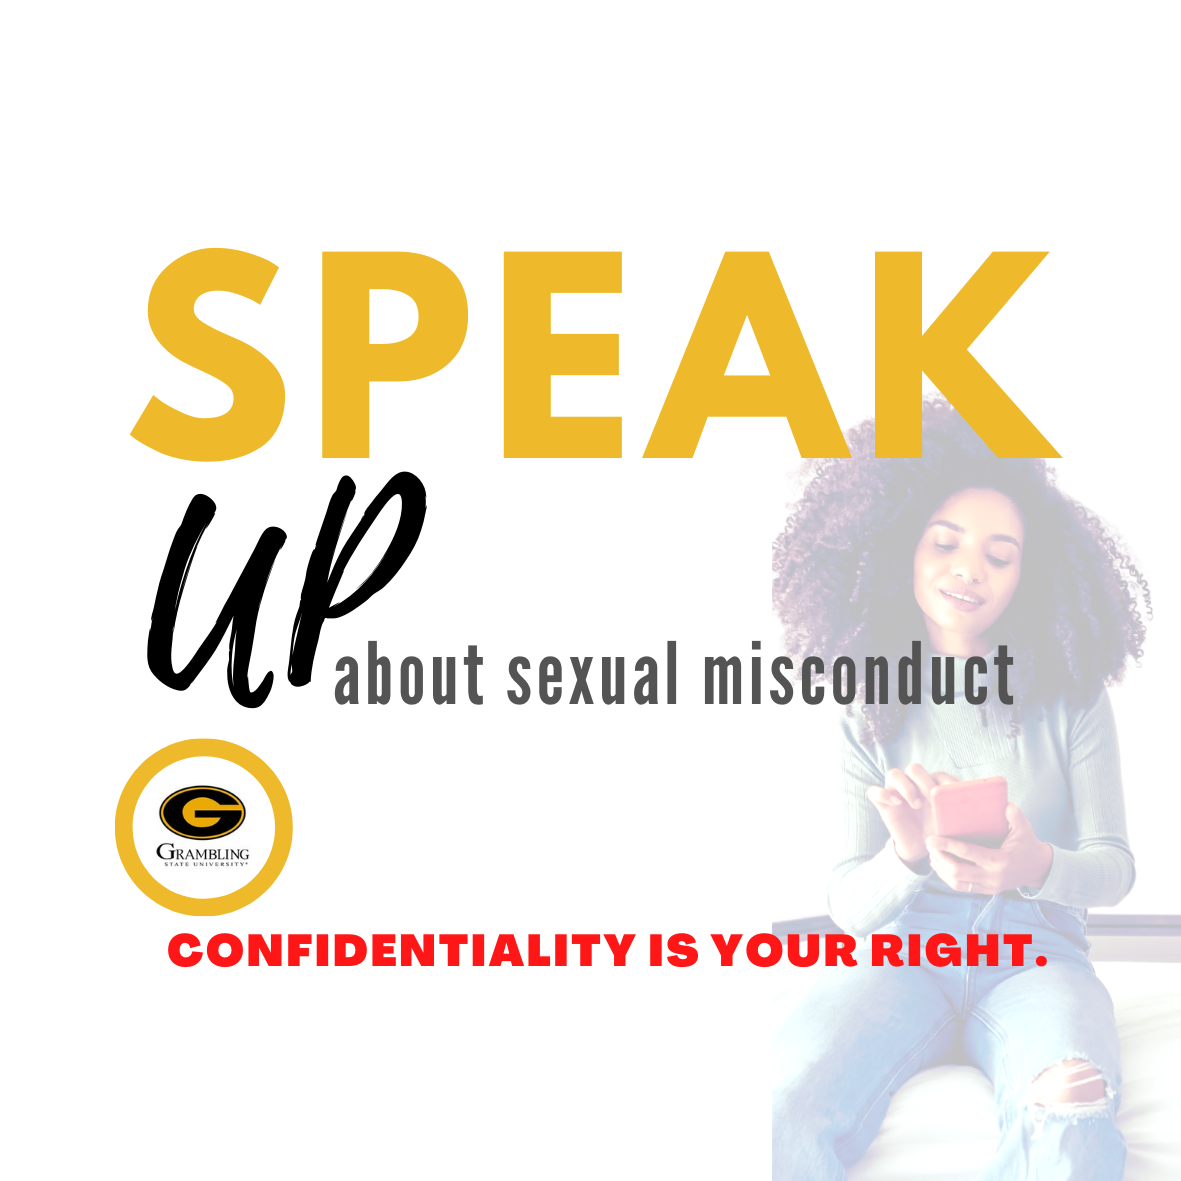 Speak Up about sexual misconduct